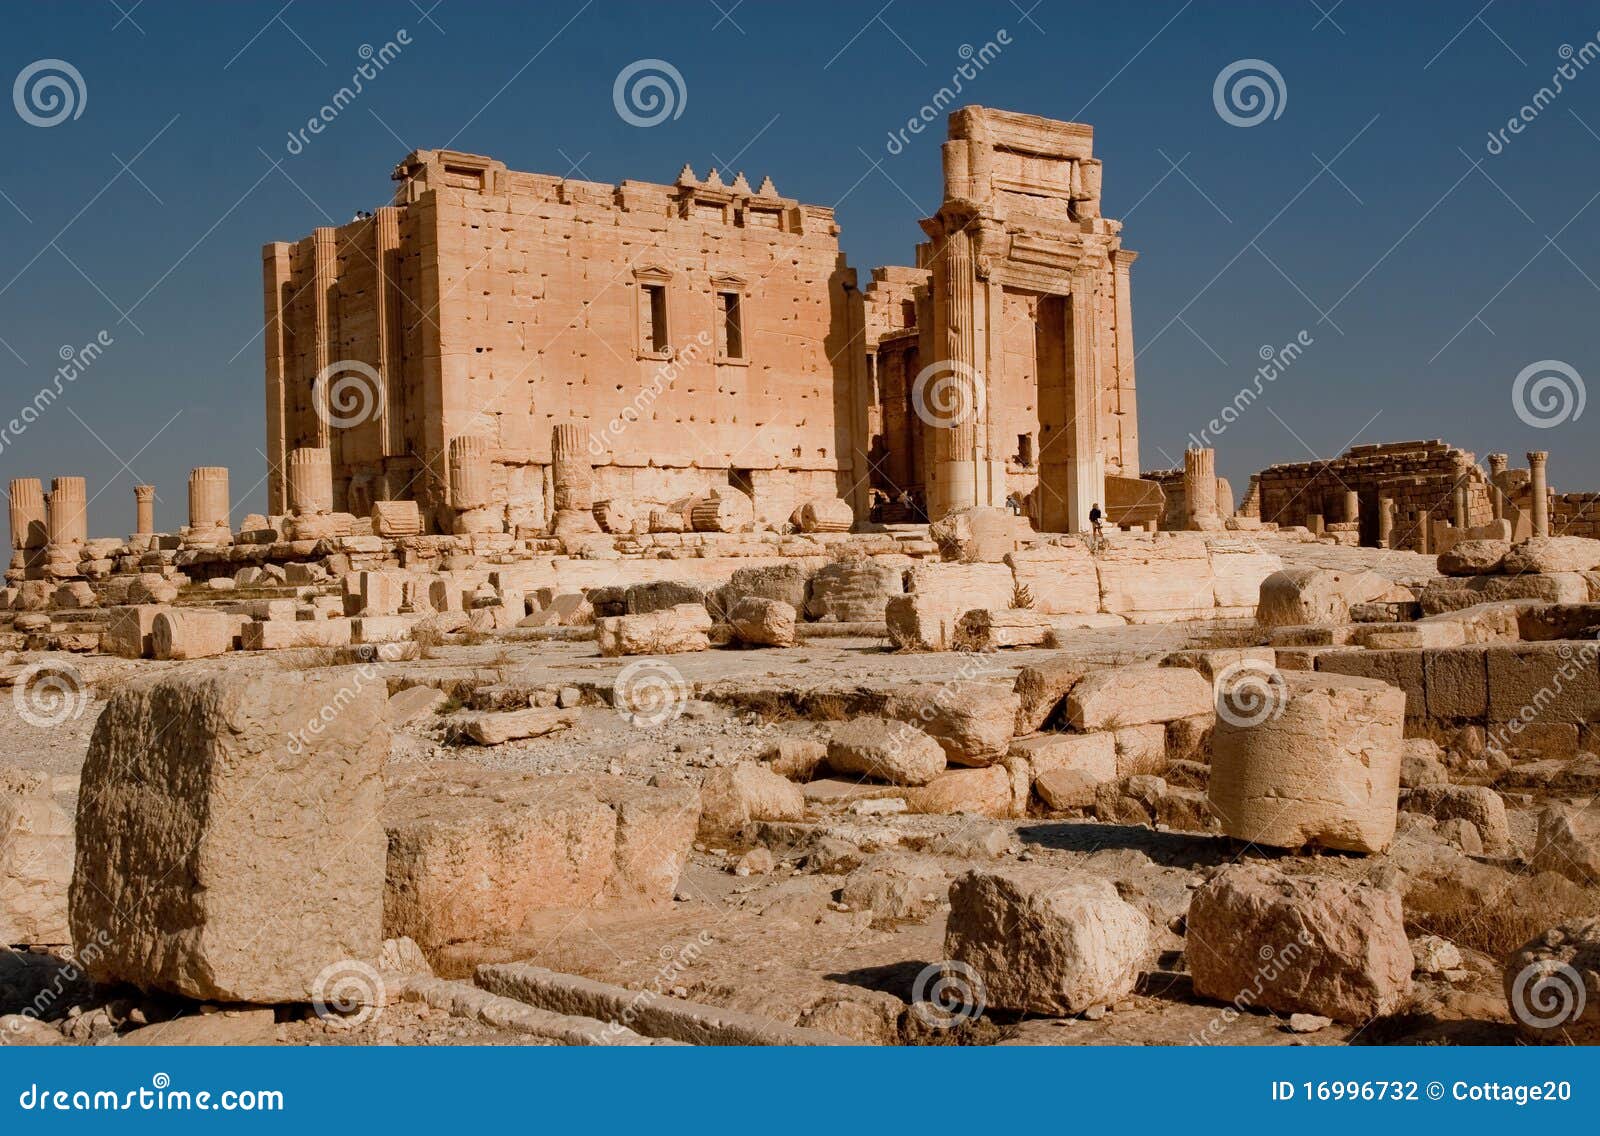 temple of bel in palmyra